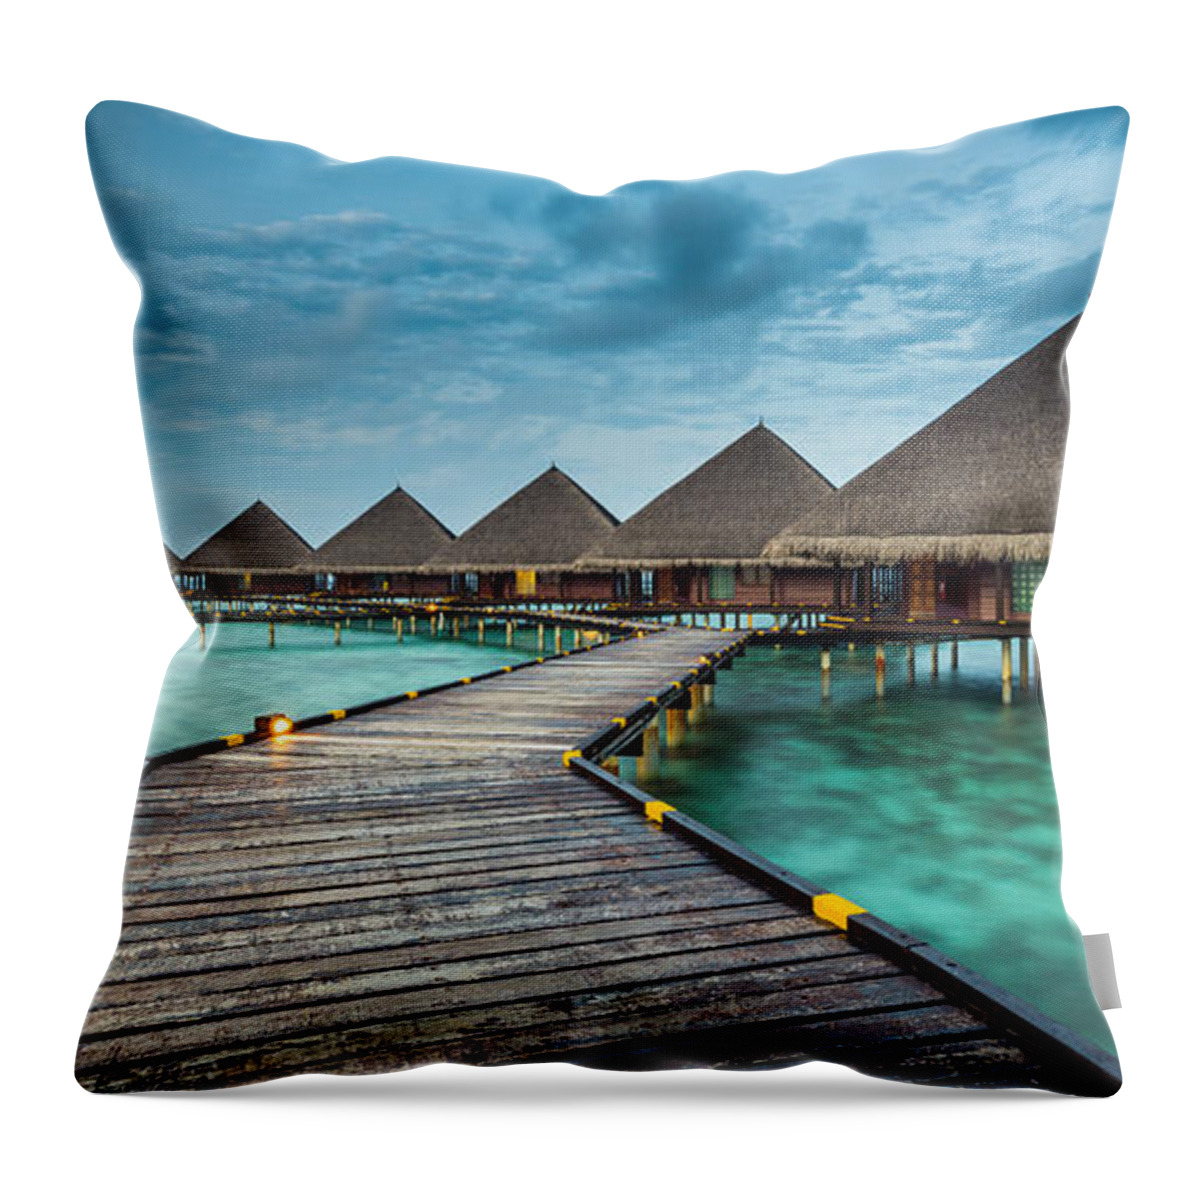 Amazing Throw Pillow featuring the photograph Way To Luxury 2x1 by Hannes Cmarits